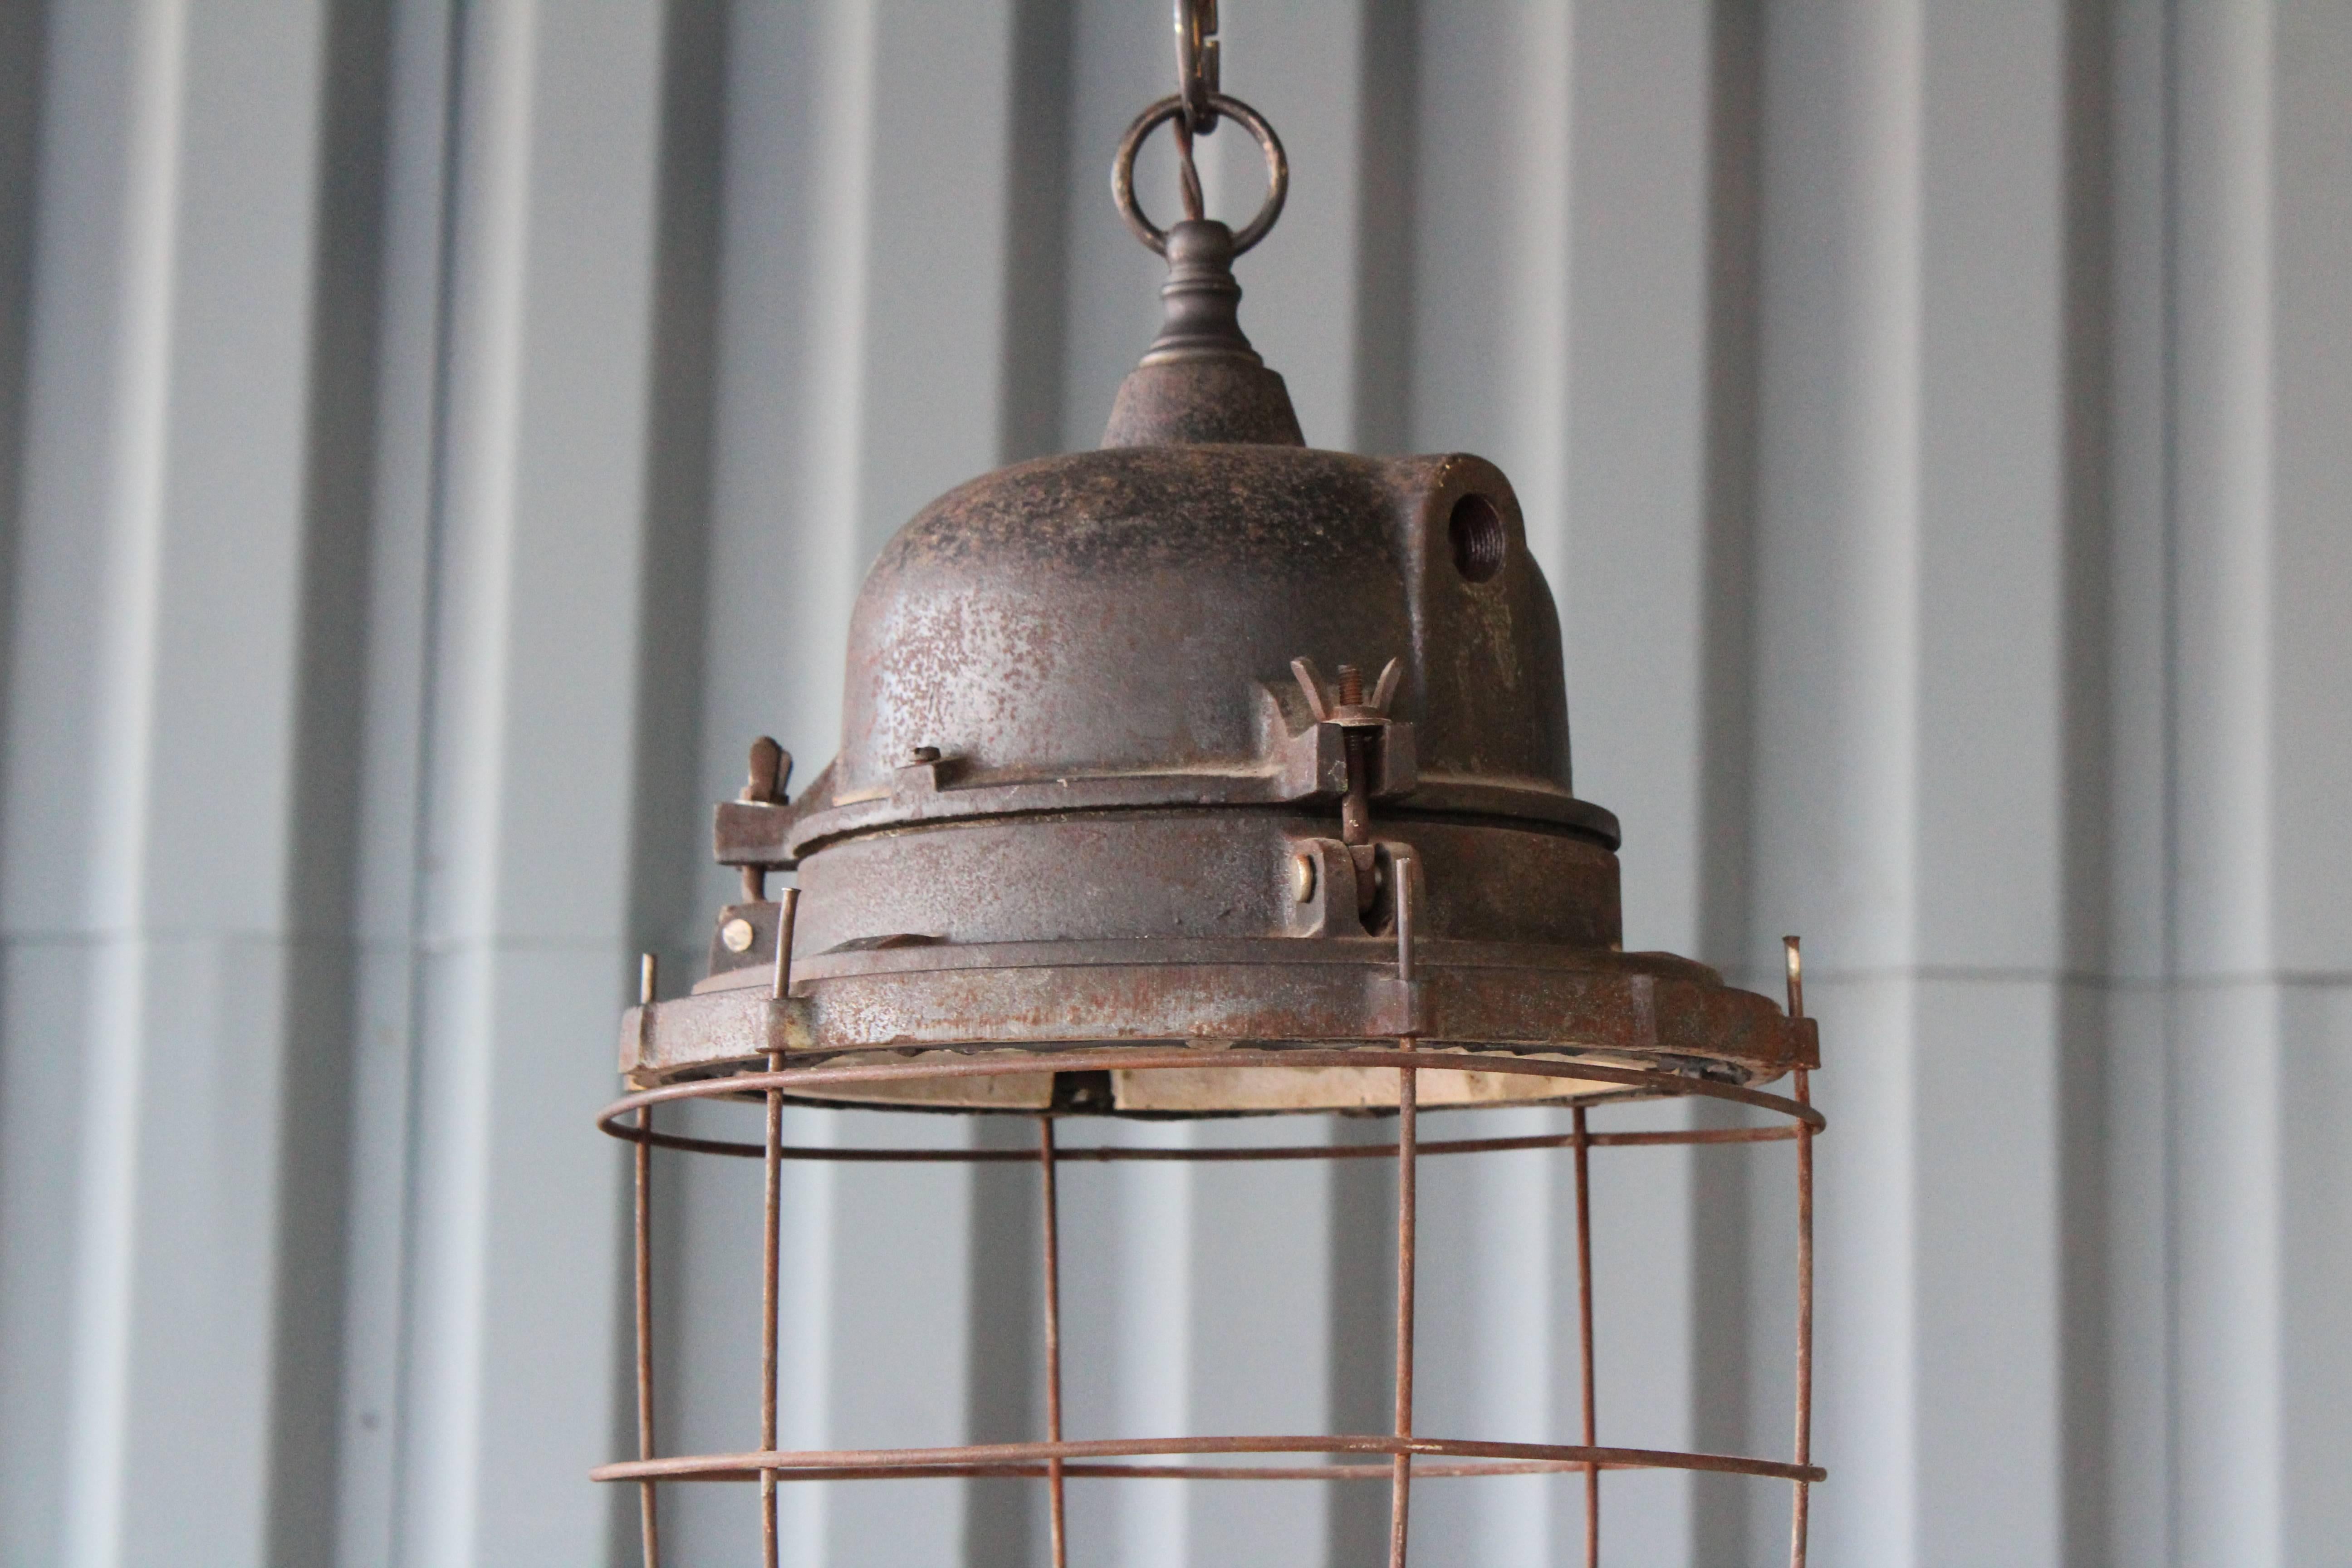 Vintage industrial hanging light with metal cage cover. Newly rewired.